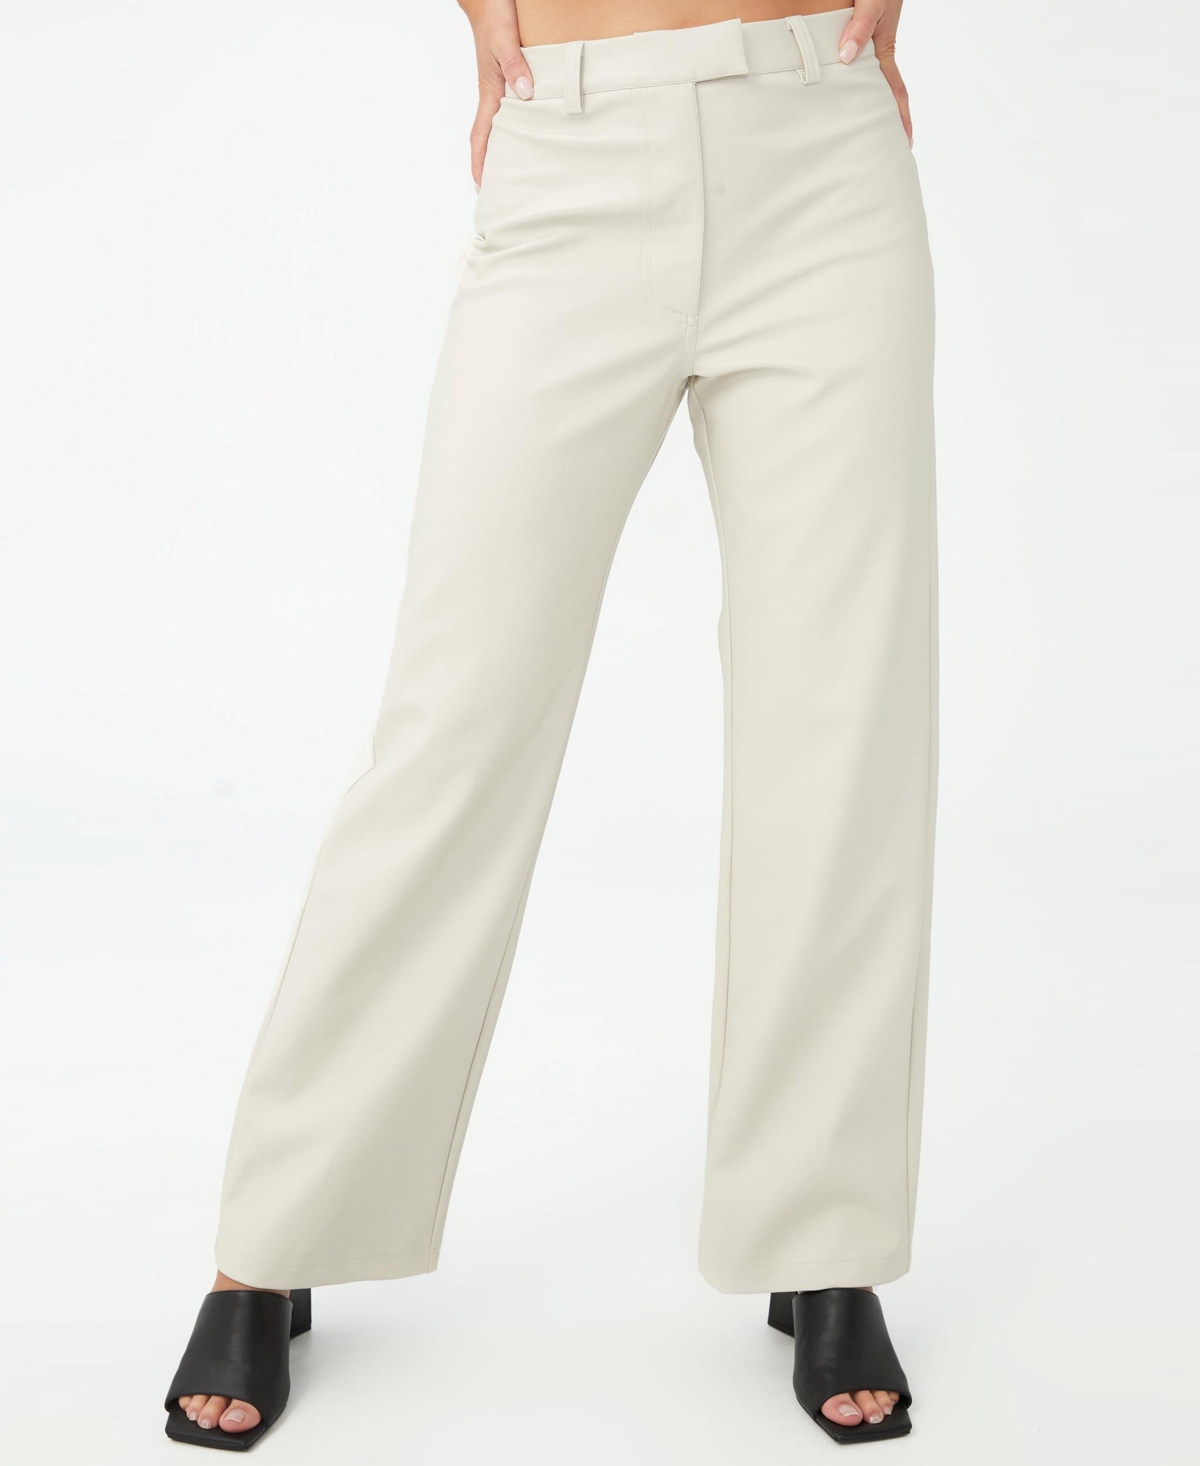 Cotton On Women's Arlow Straight Faux Leather Pants